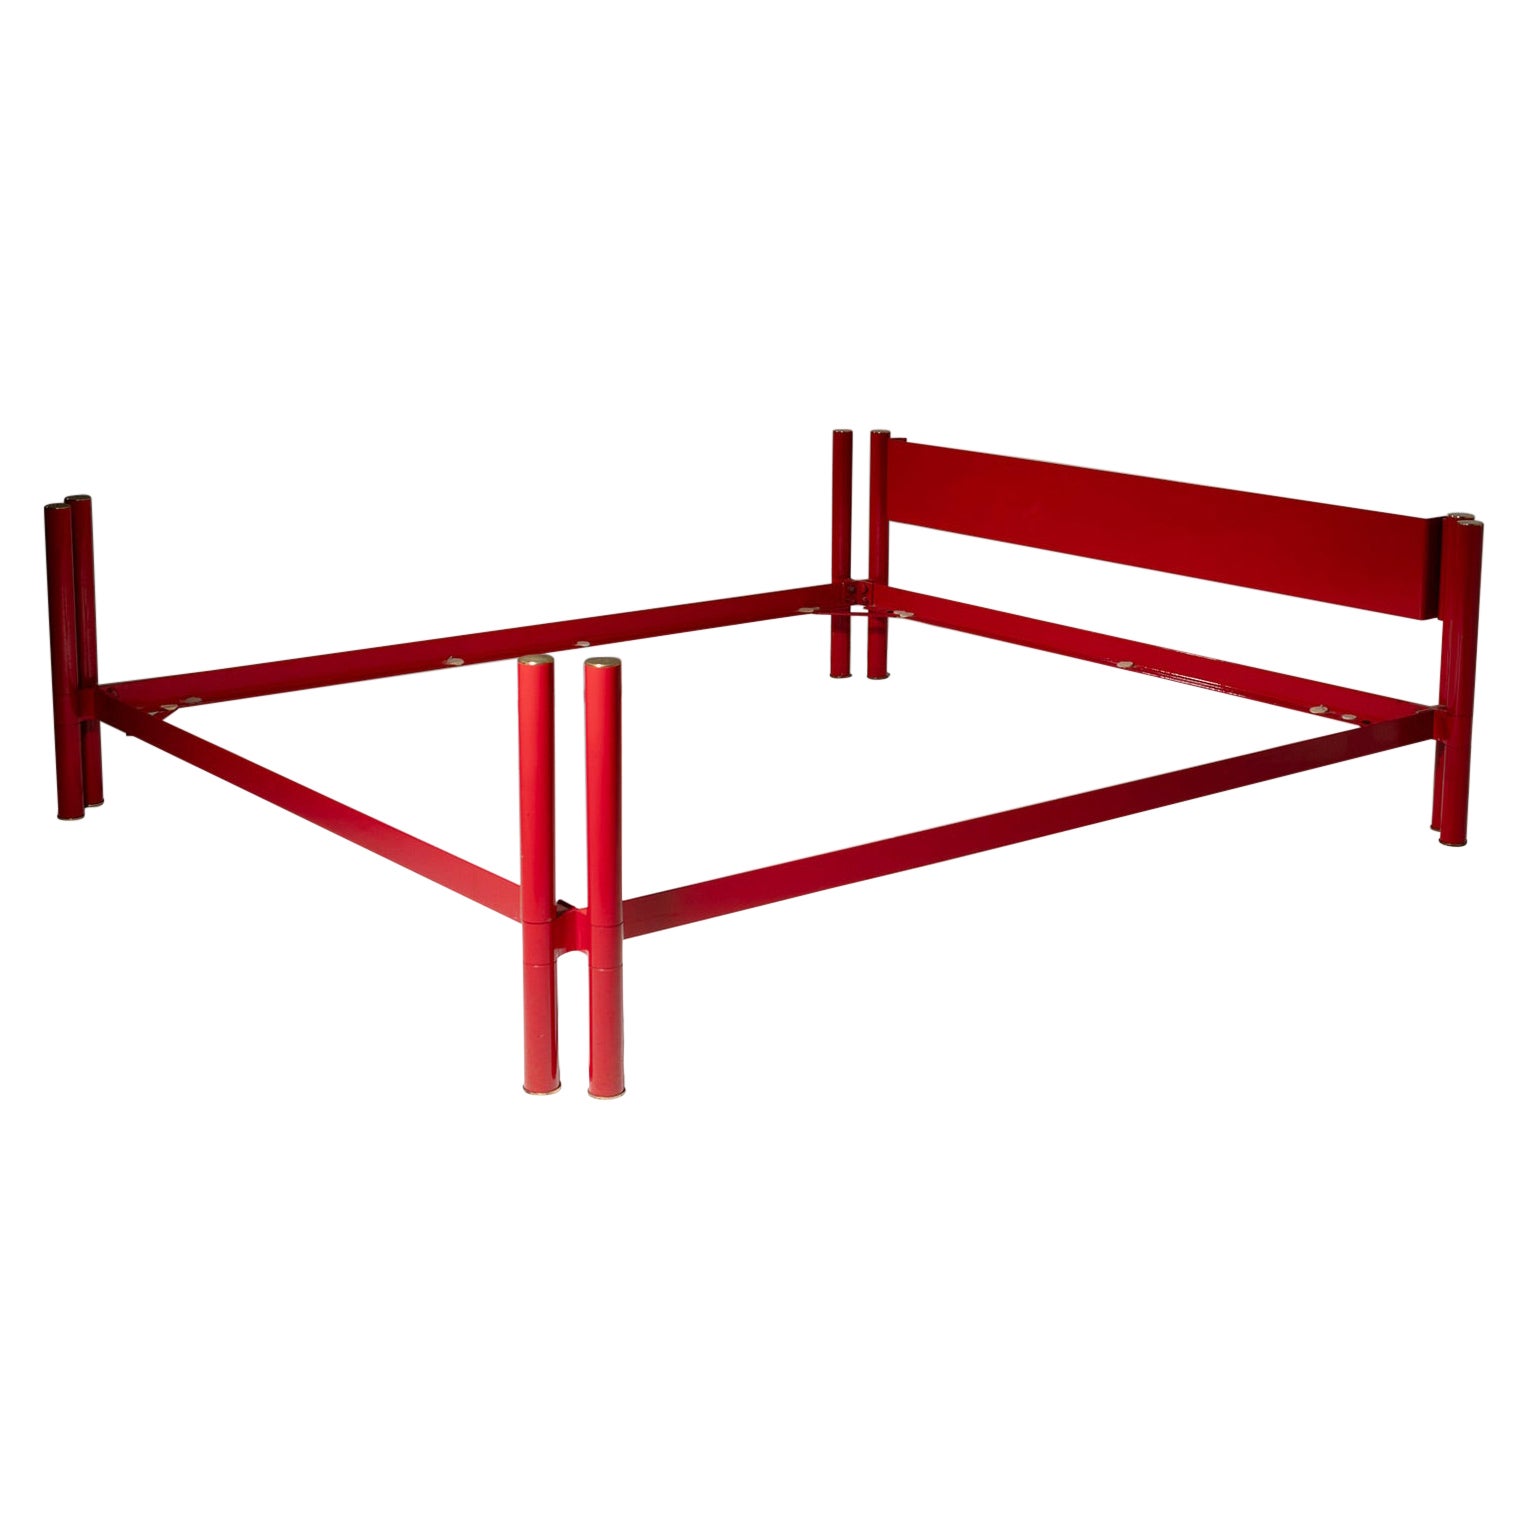 Red Steel "Bambù" Double Bed by Giovanni Ausenda for Ny Form, Italy, 1970s For Sale